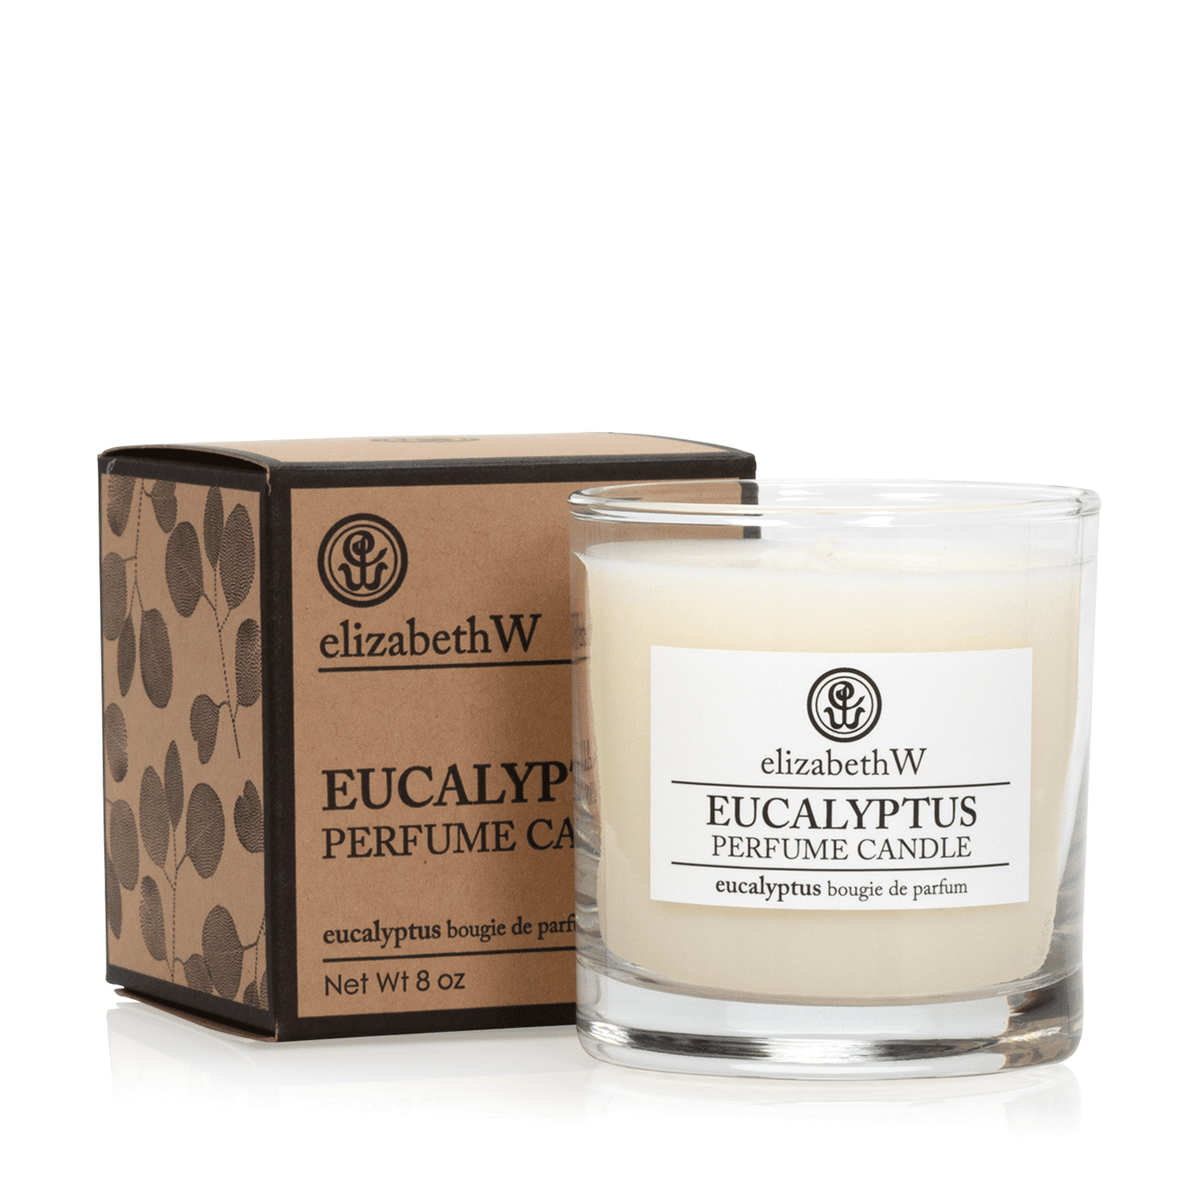 A hand-poured glass candle labeled "elizabeth W Purely Essential Eucalyptus Candle" next to its brown packaging box with similar branding, isolated on a white background.